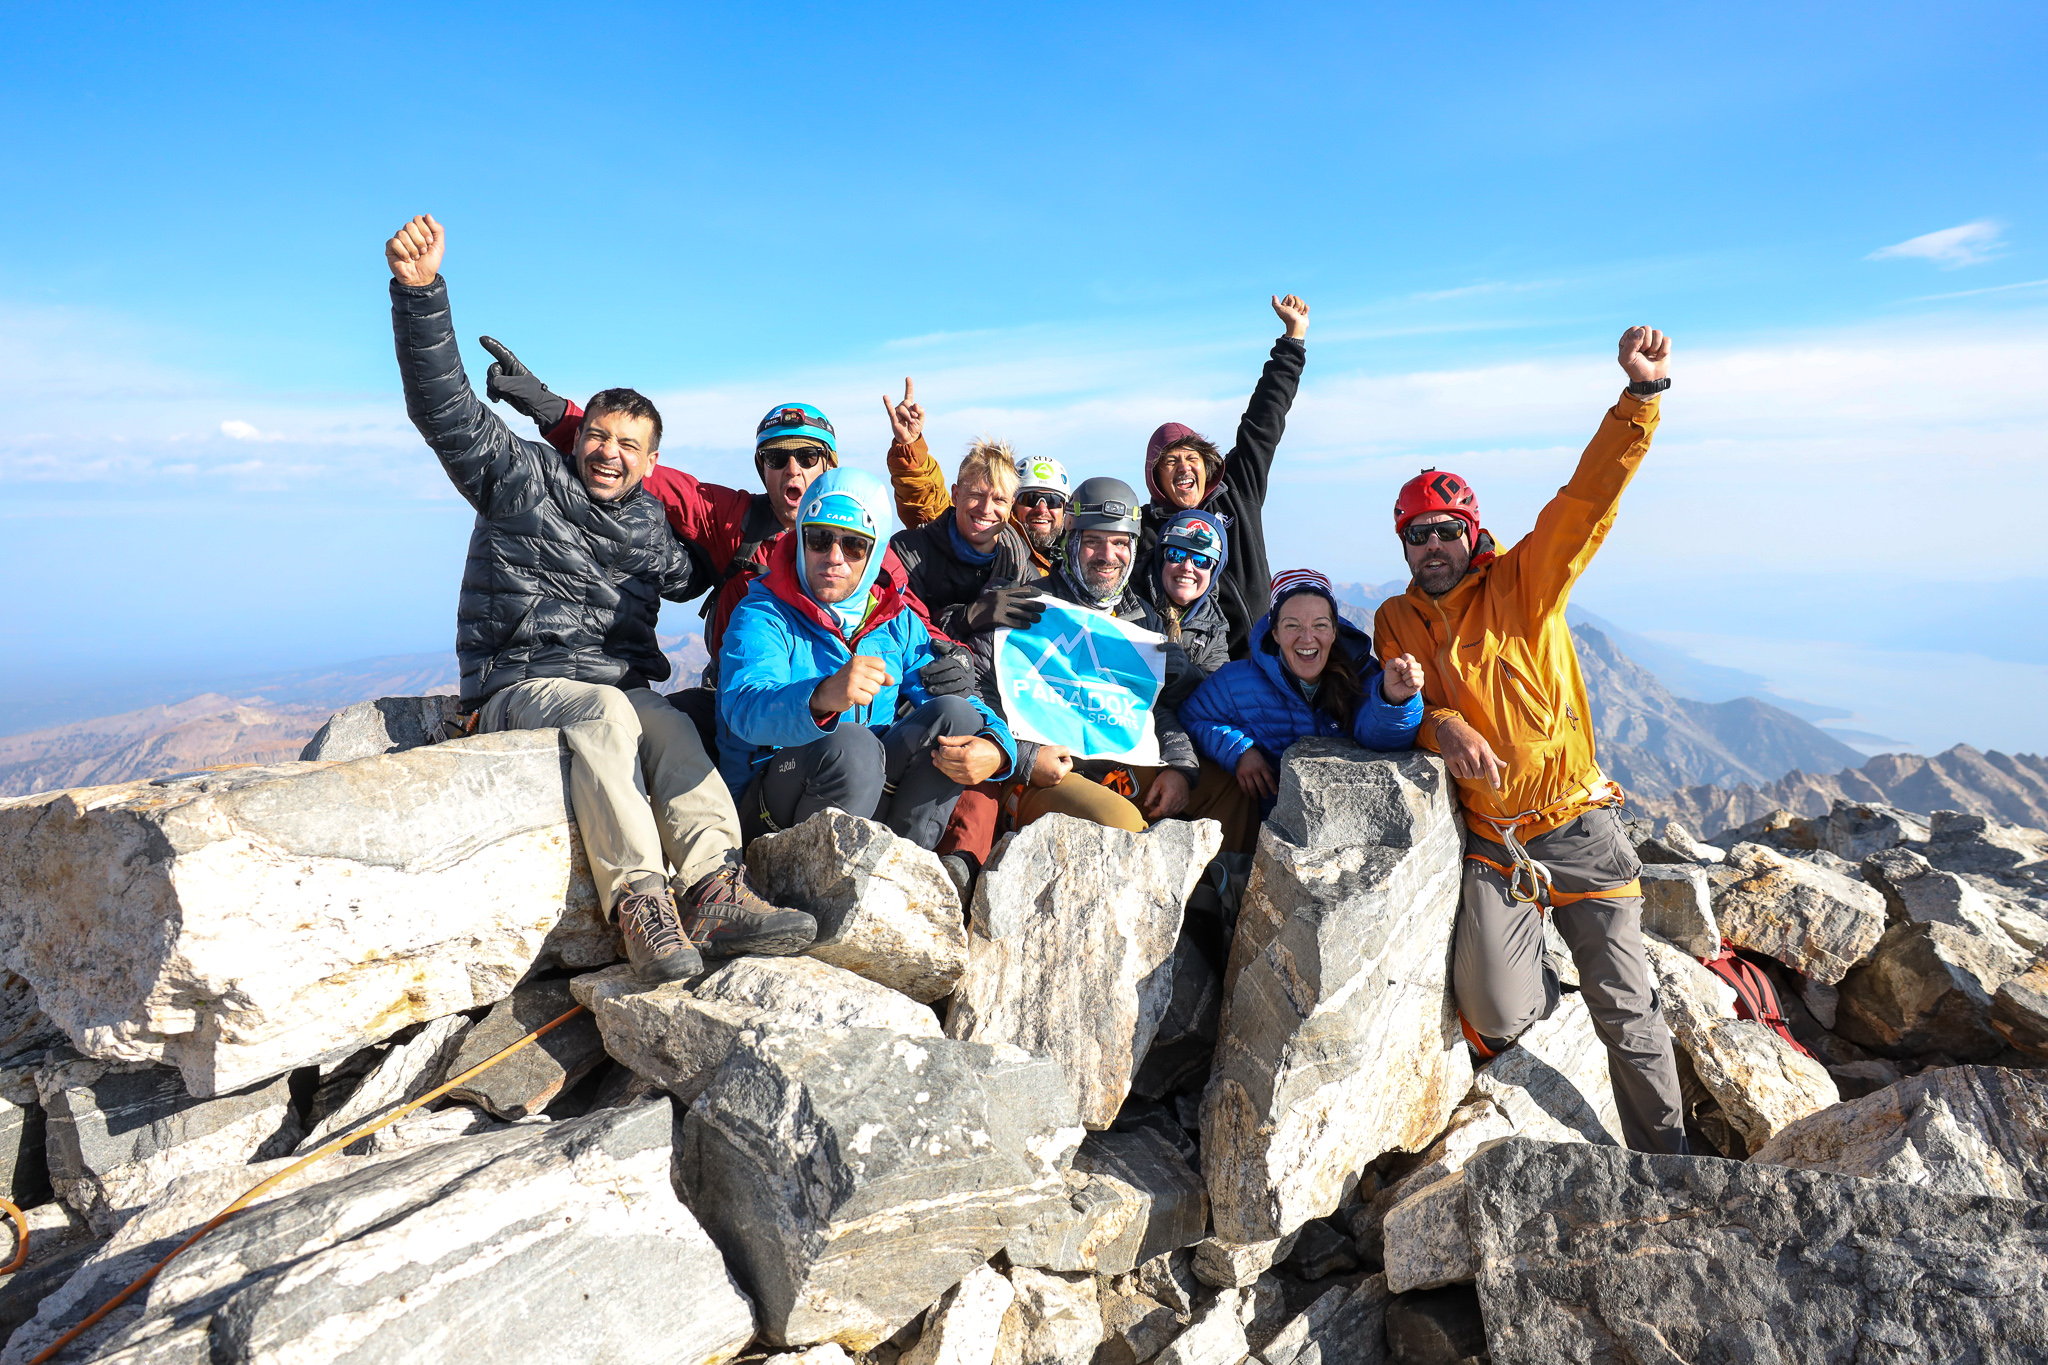 Paradox group on the summit of the Grand Teton, smiling and holding a Paradox banner